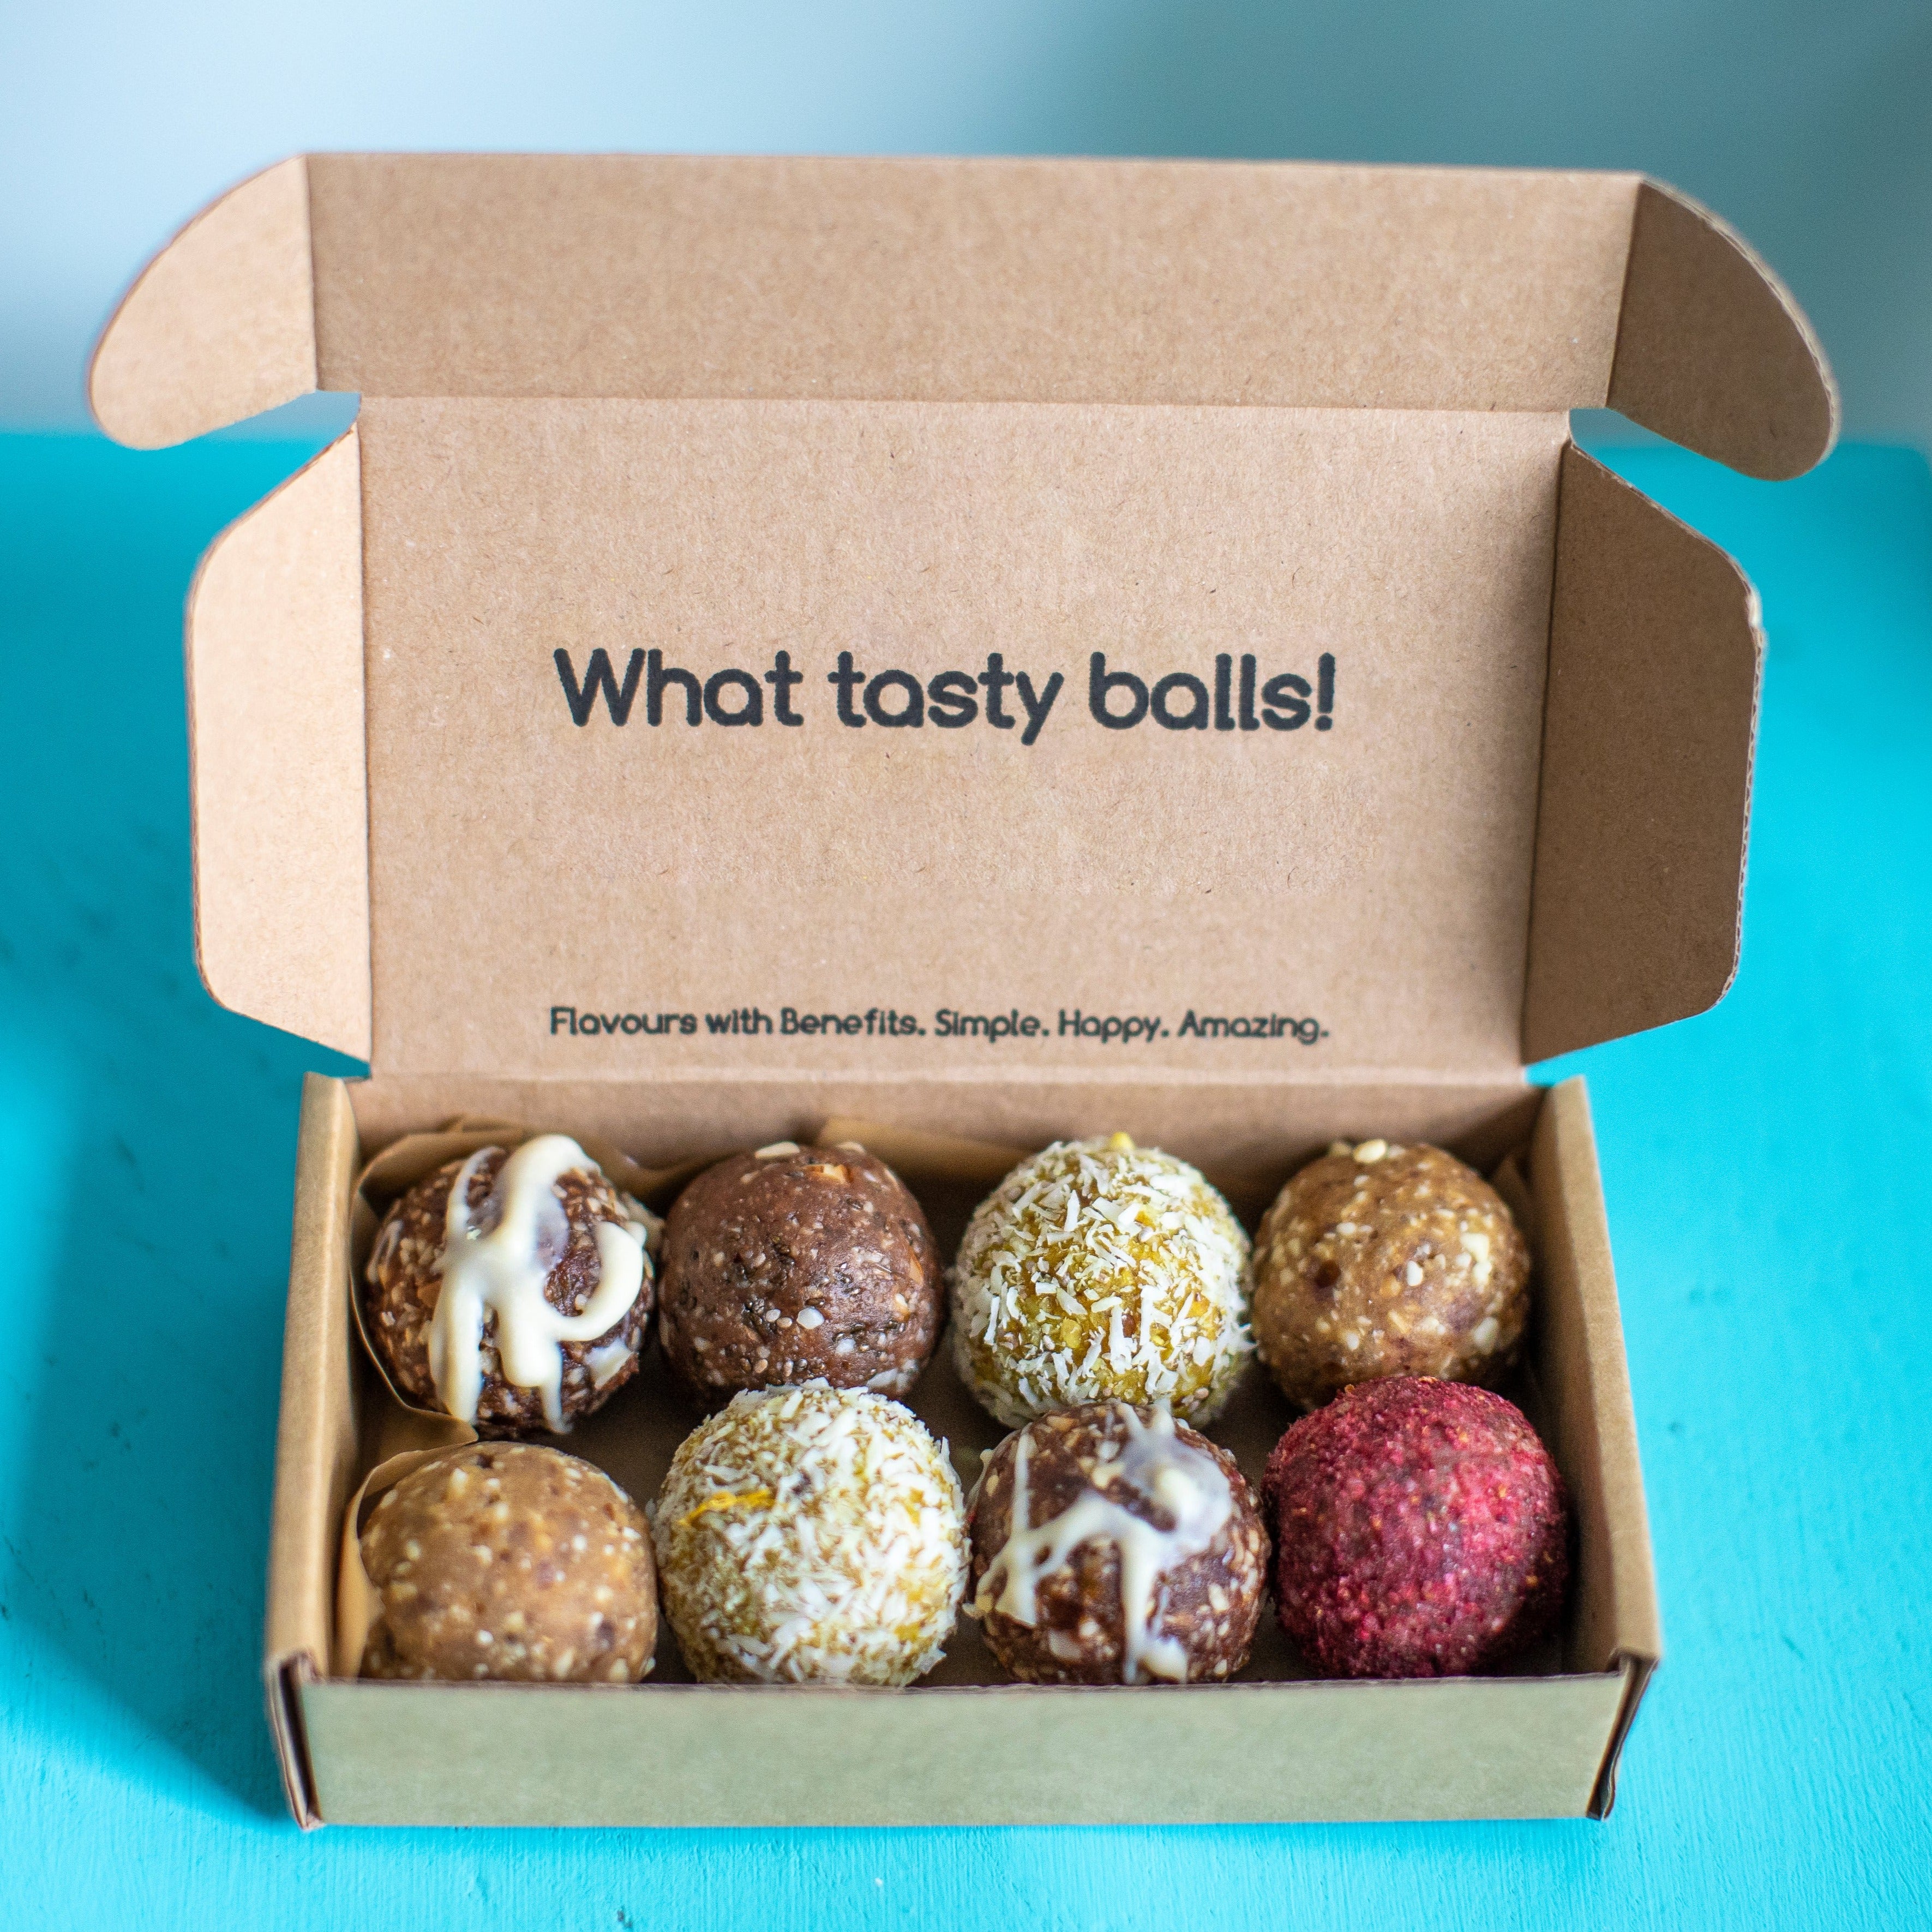 A box of mixed energy balls on a blue background